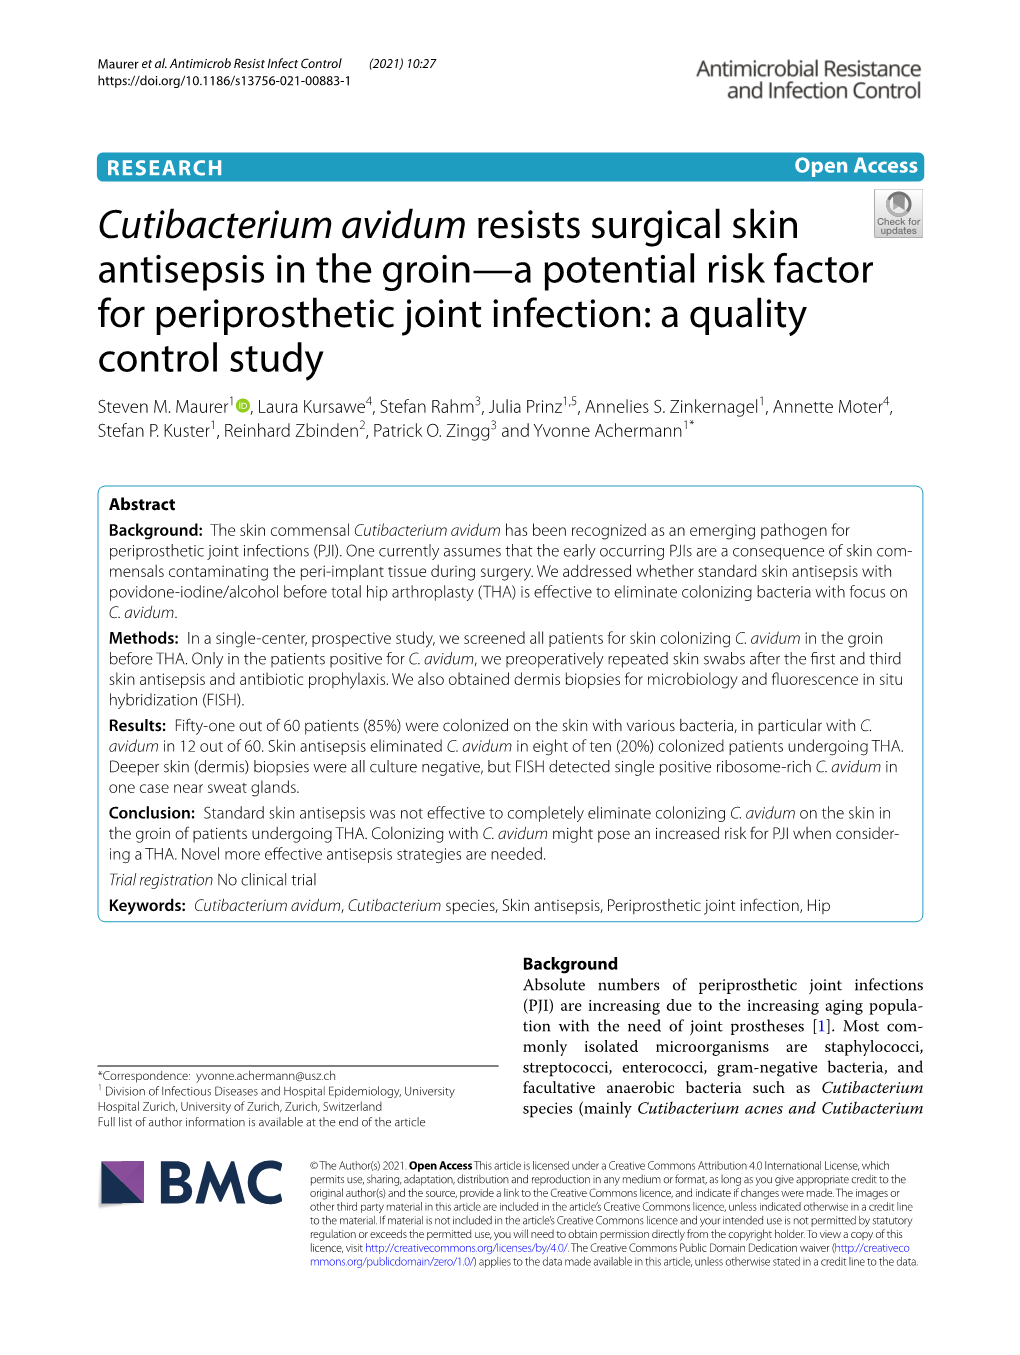 Cutibacterium Avidum Resists Surgical Skin Antisepsis in the Groin—A Potential Risk Factor for Periprosthetic Joint Infection: a Quality Control Study Steven M